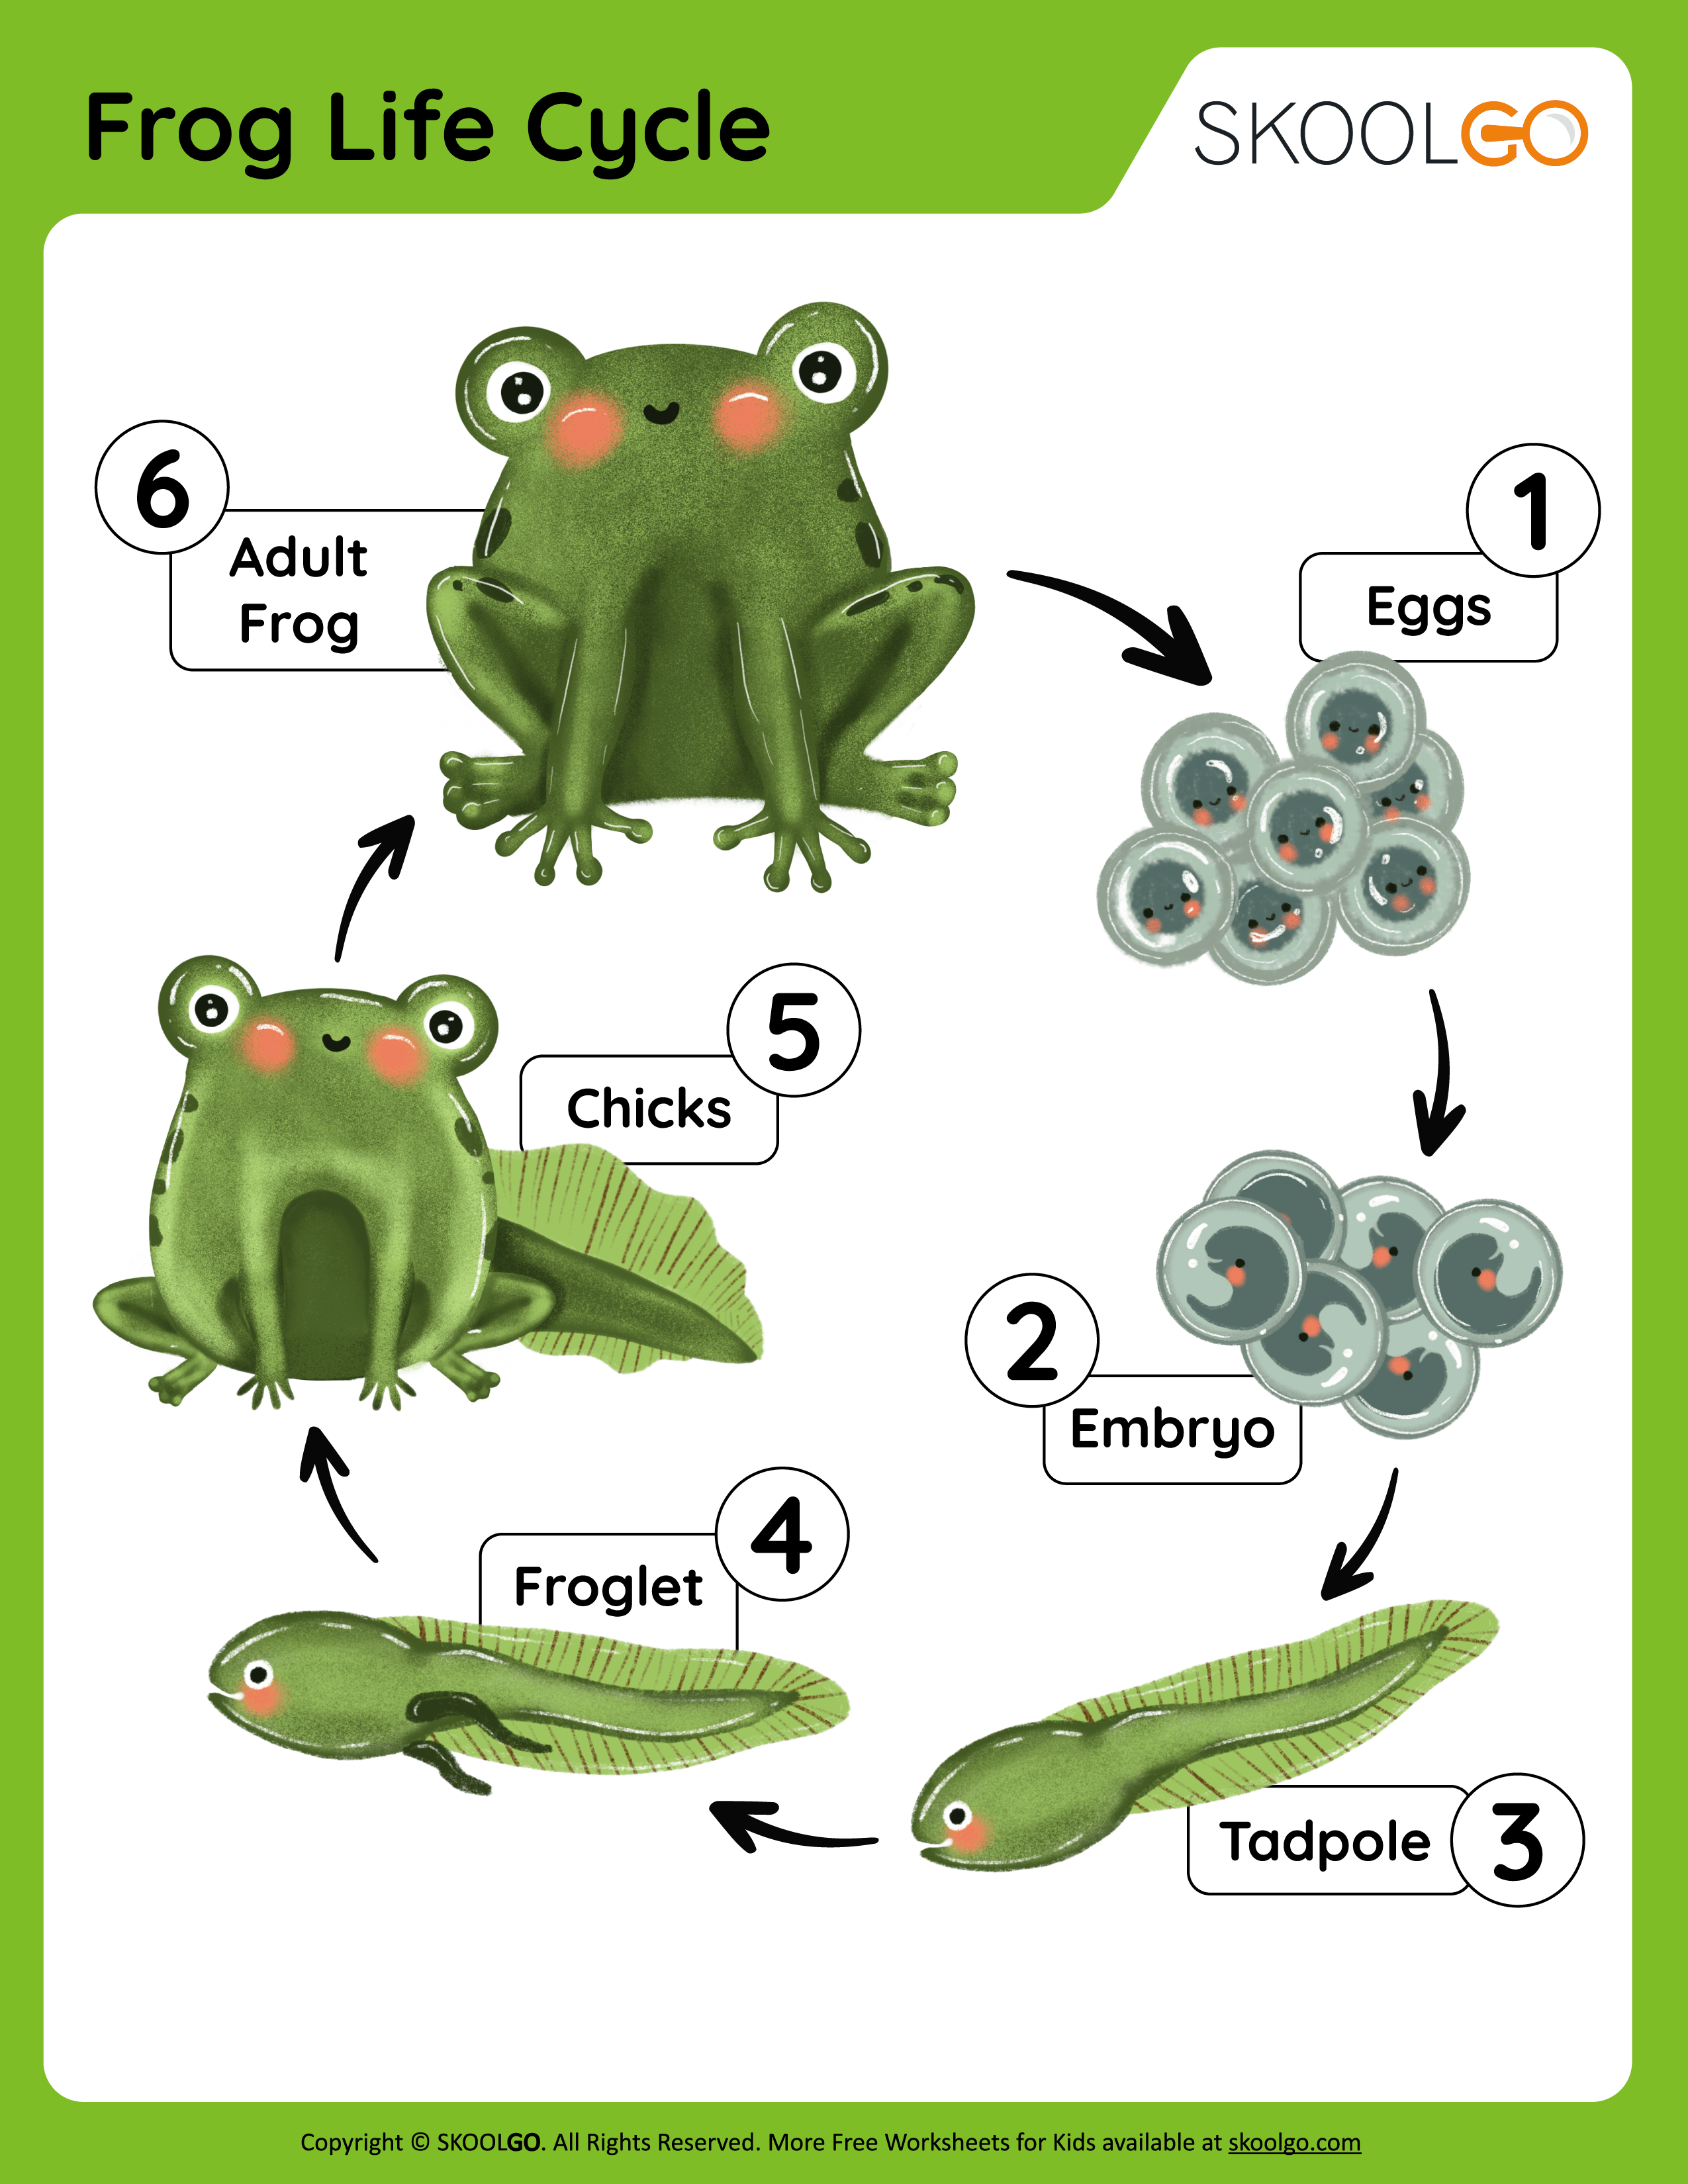 Frog Life Cycle - Free Worksheet for Kids